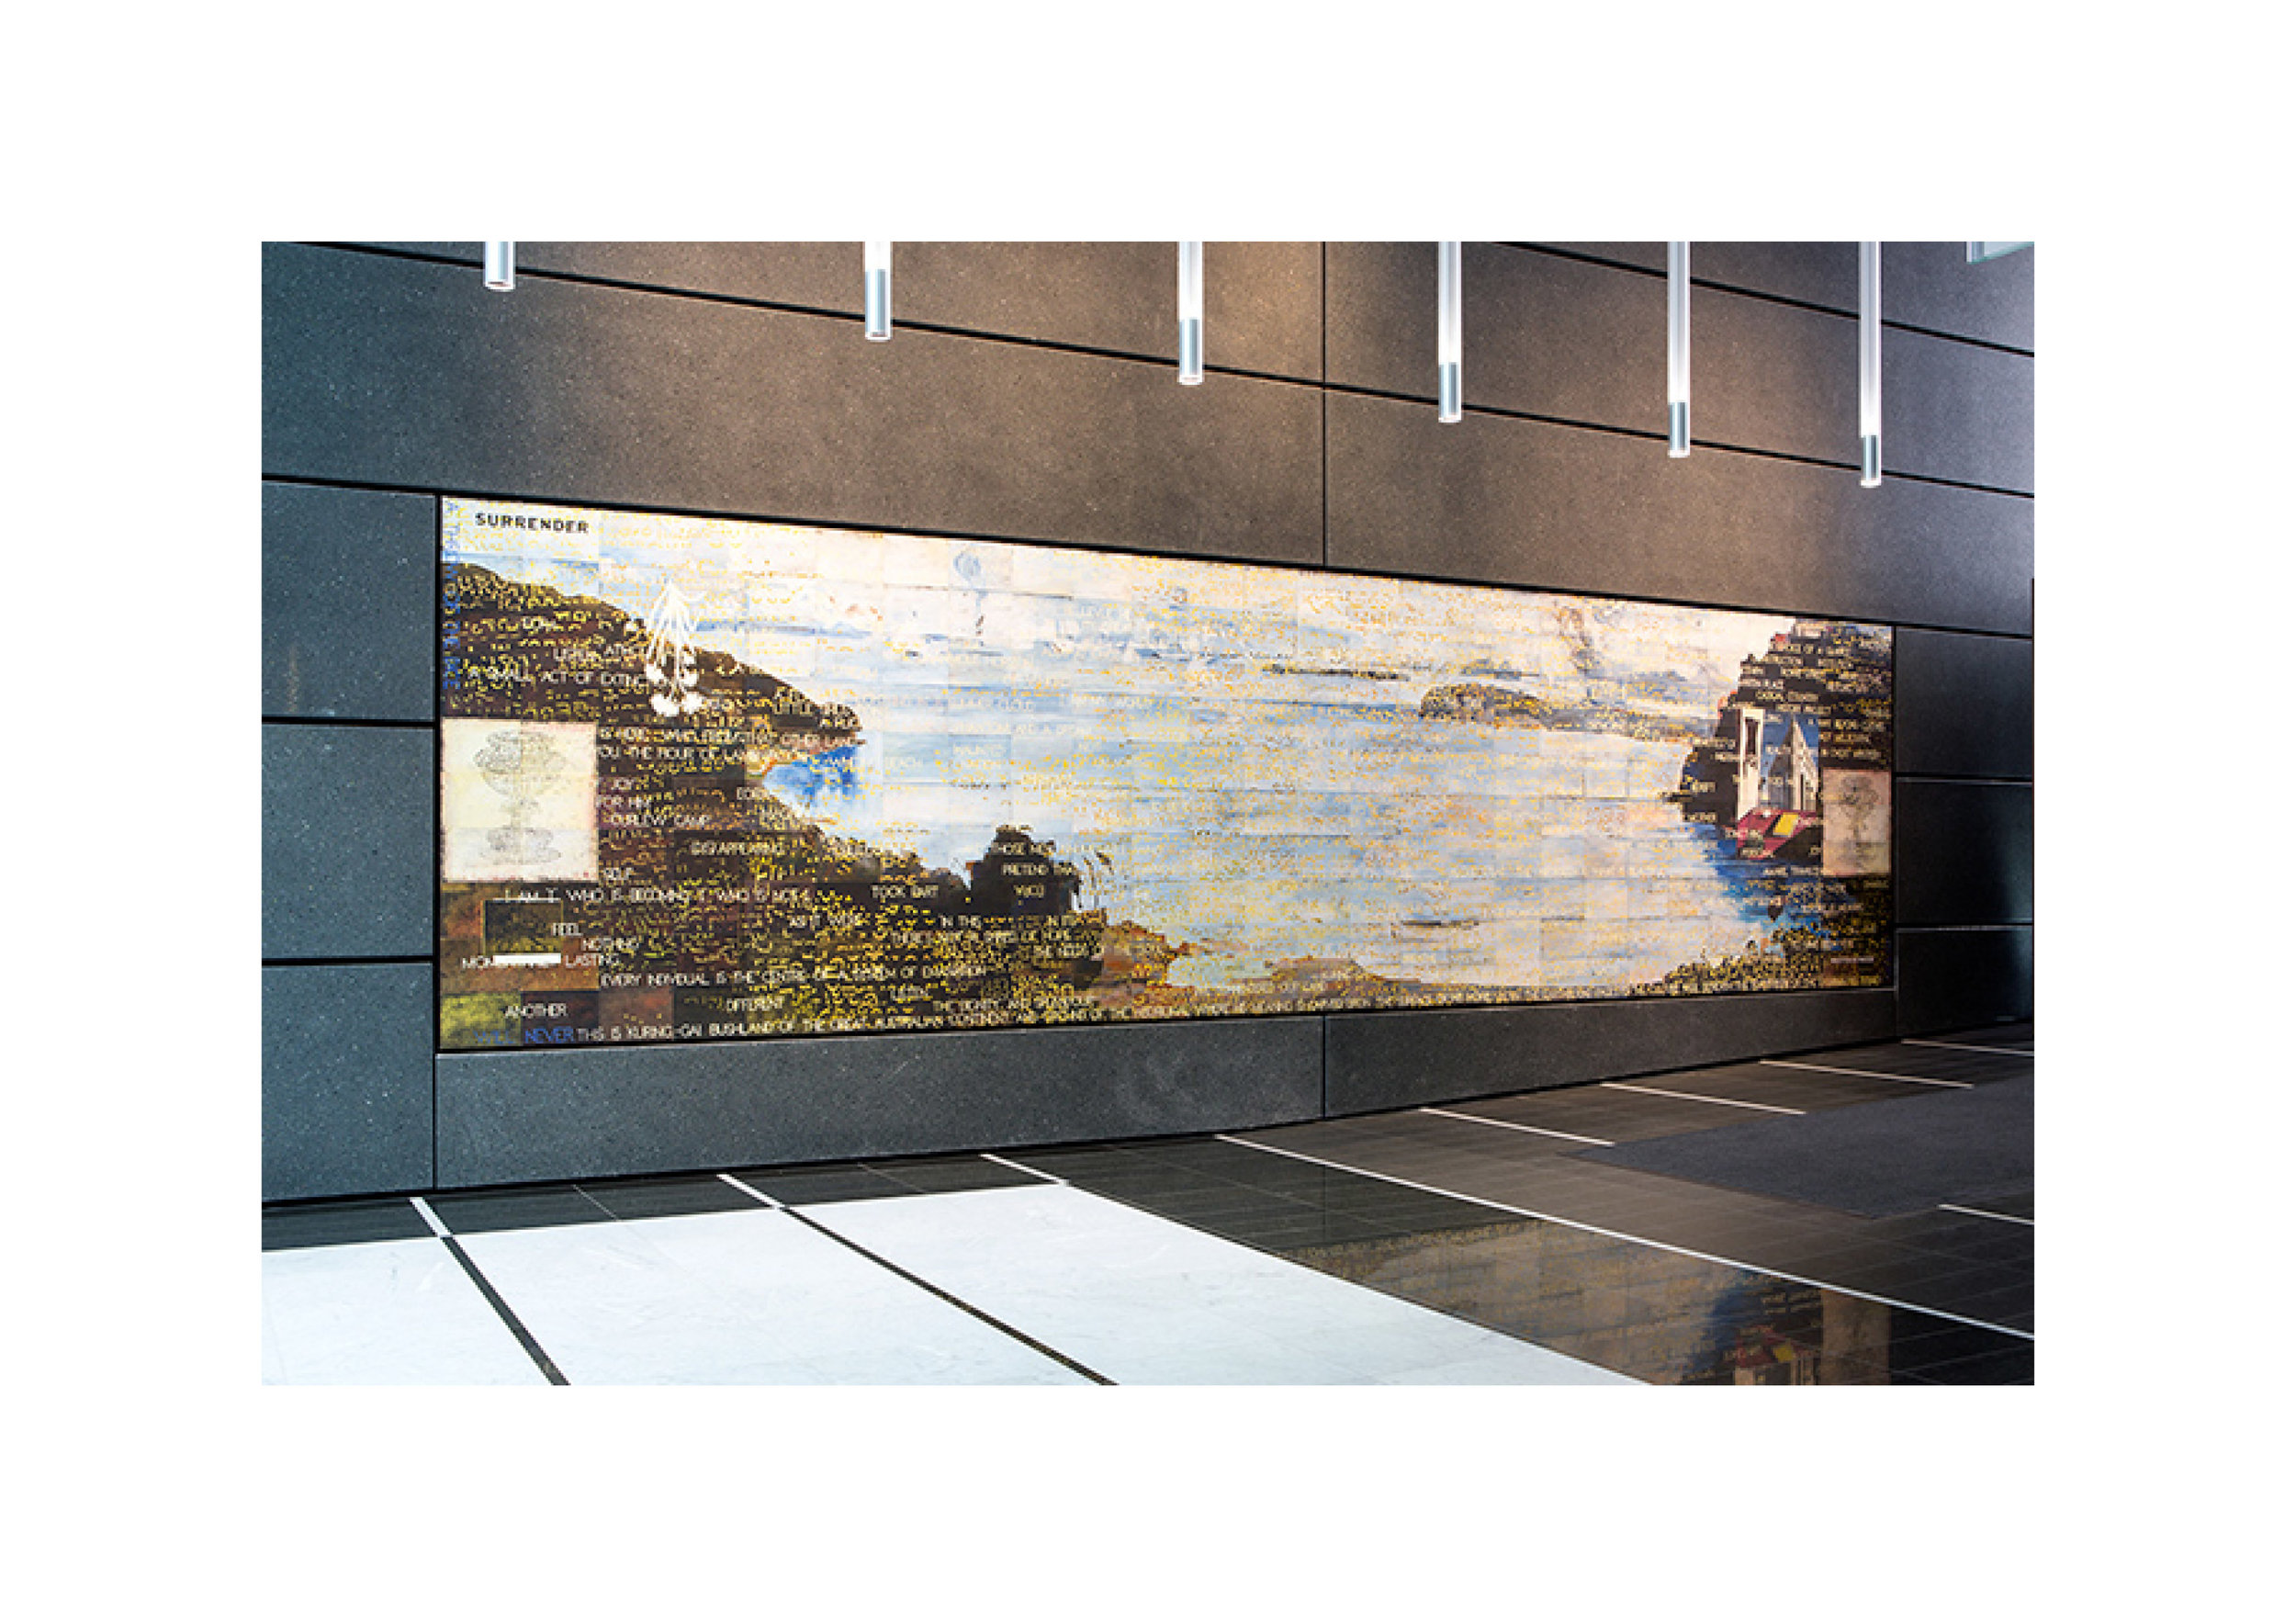  Imants Tillers   Written in Water (Hymn to Sydney) , 2014  Installation view synthetic polymer paint, gouache on 270 canvasboards, nos. 91939 - 92208 254 x 960 cm Collection: 5 Martin Place, Commonwealth Bank Building, Sydney 